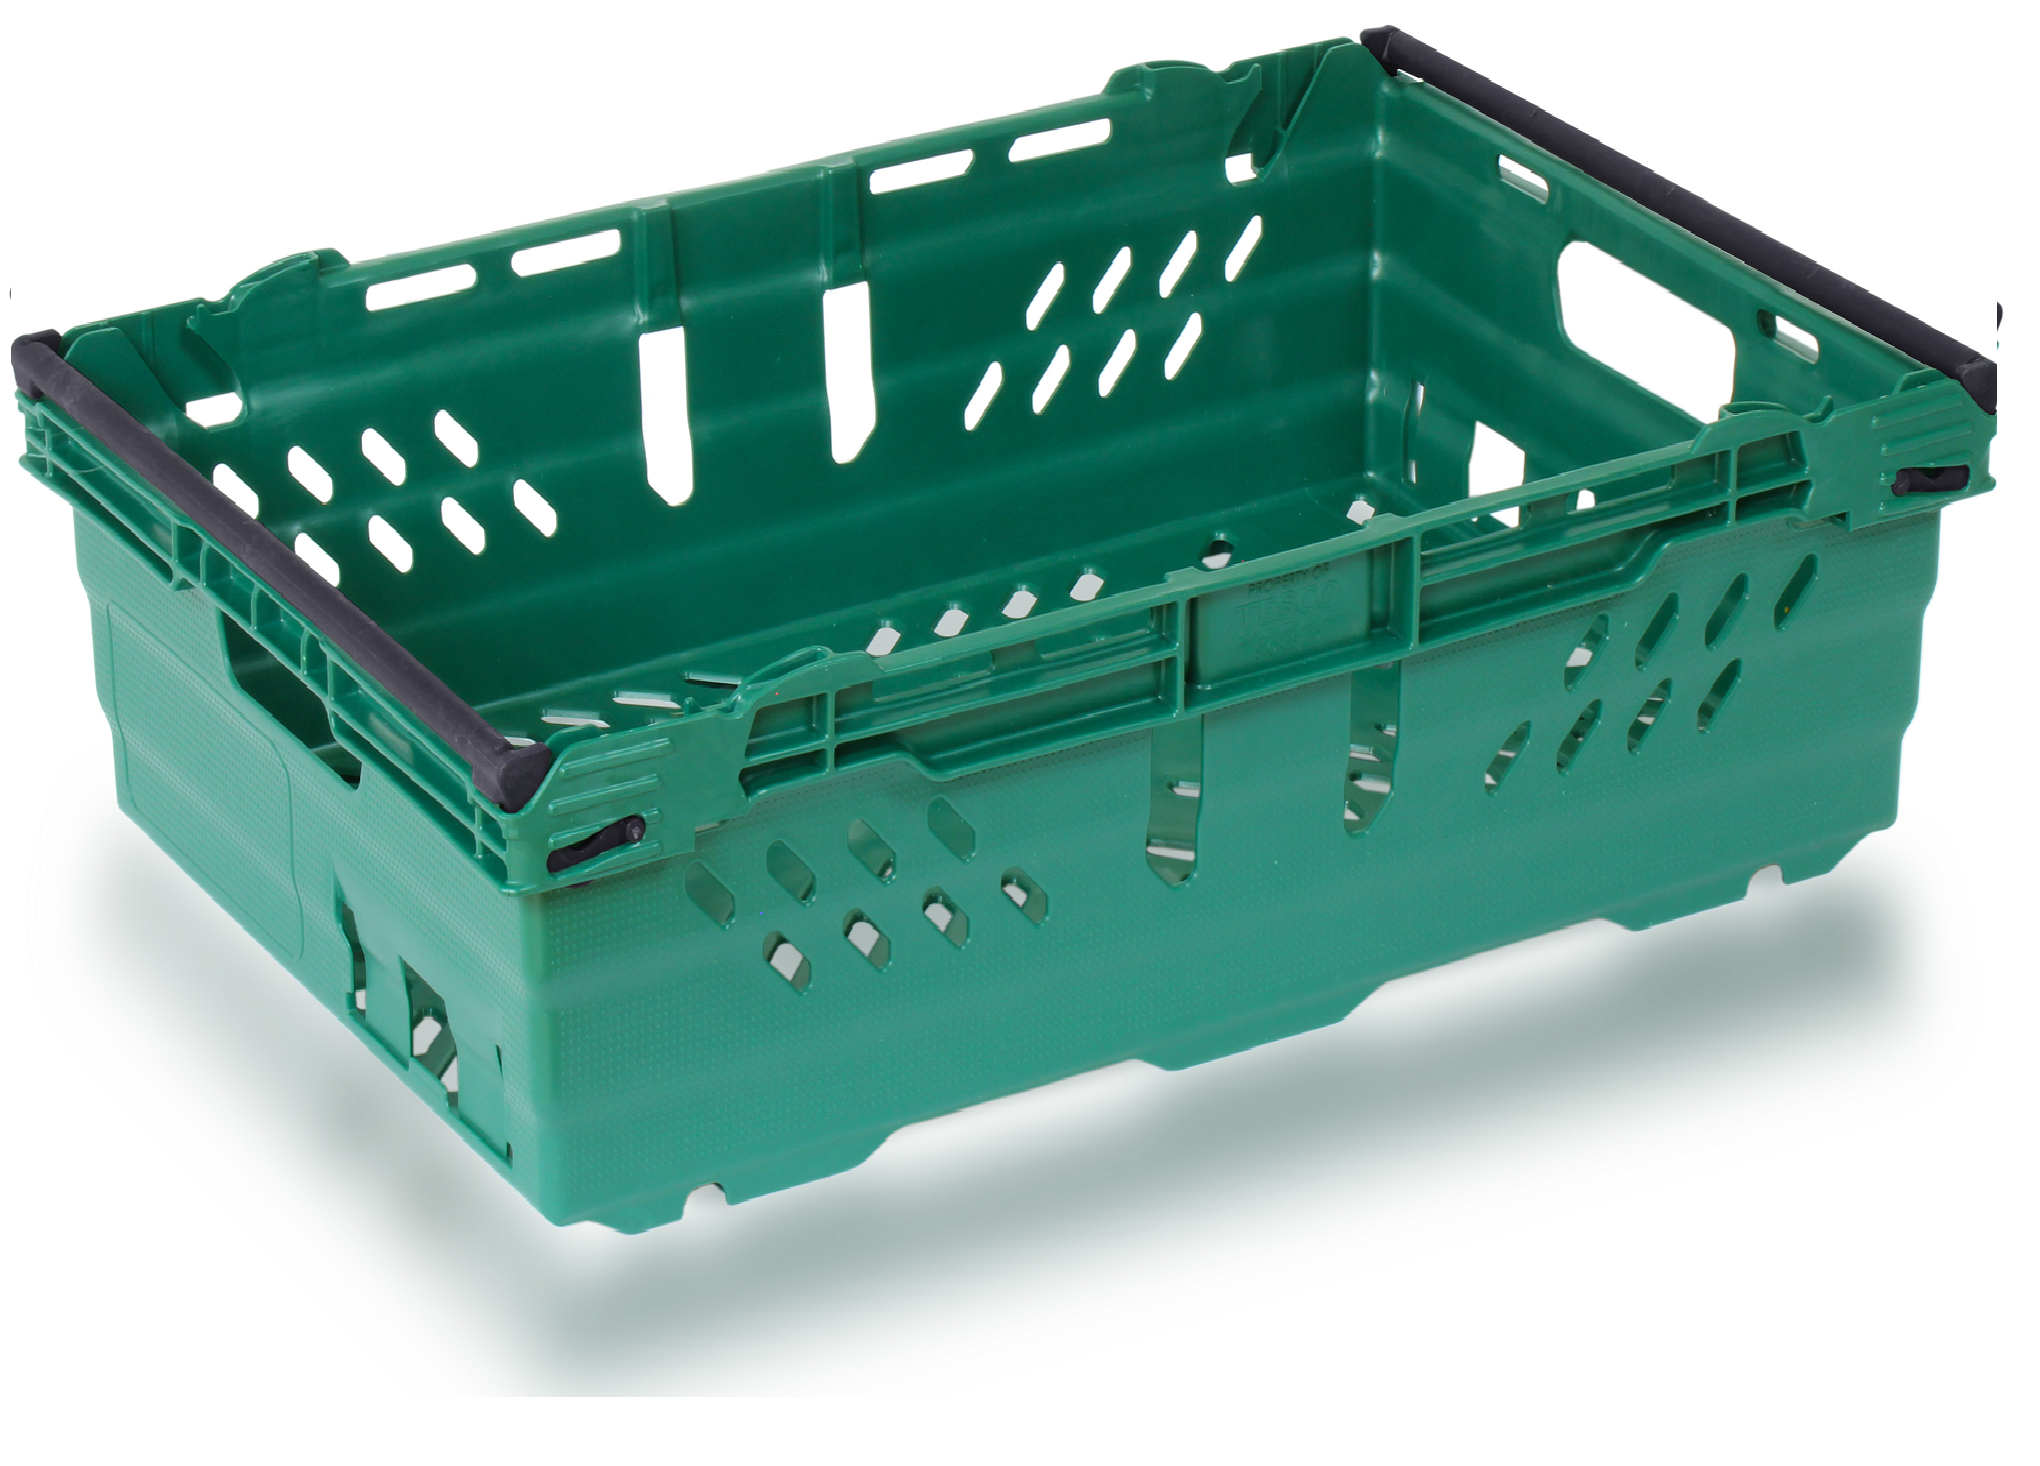 UK Suppliers Of 600x400x100 Bale Arm Crate 16 Ltr - Pack of 14 For Industrial Industry